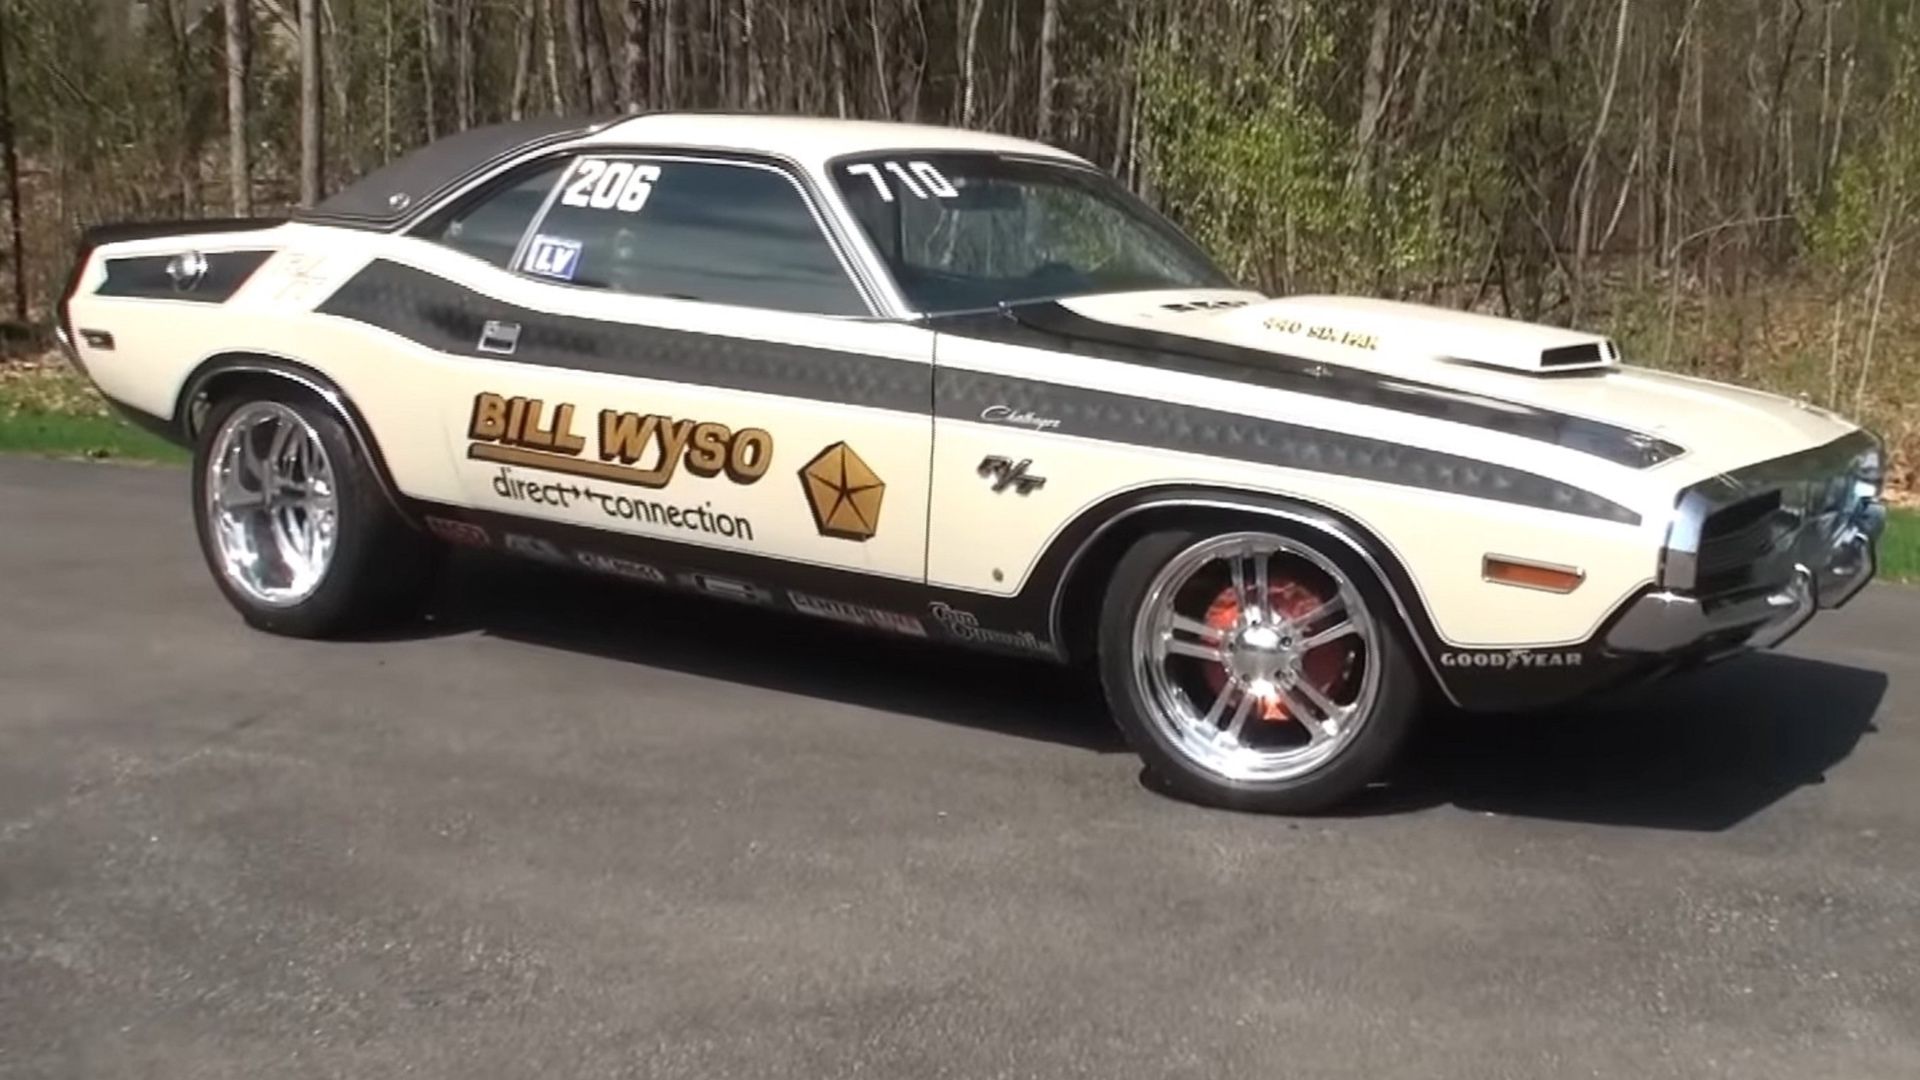 Aggressive stance of the Bill Wyso 1970 Challenger drag car